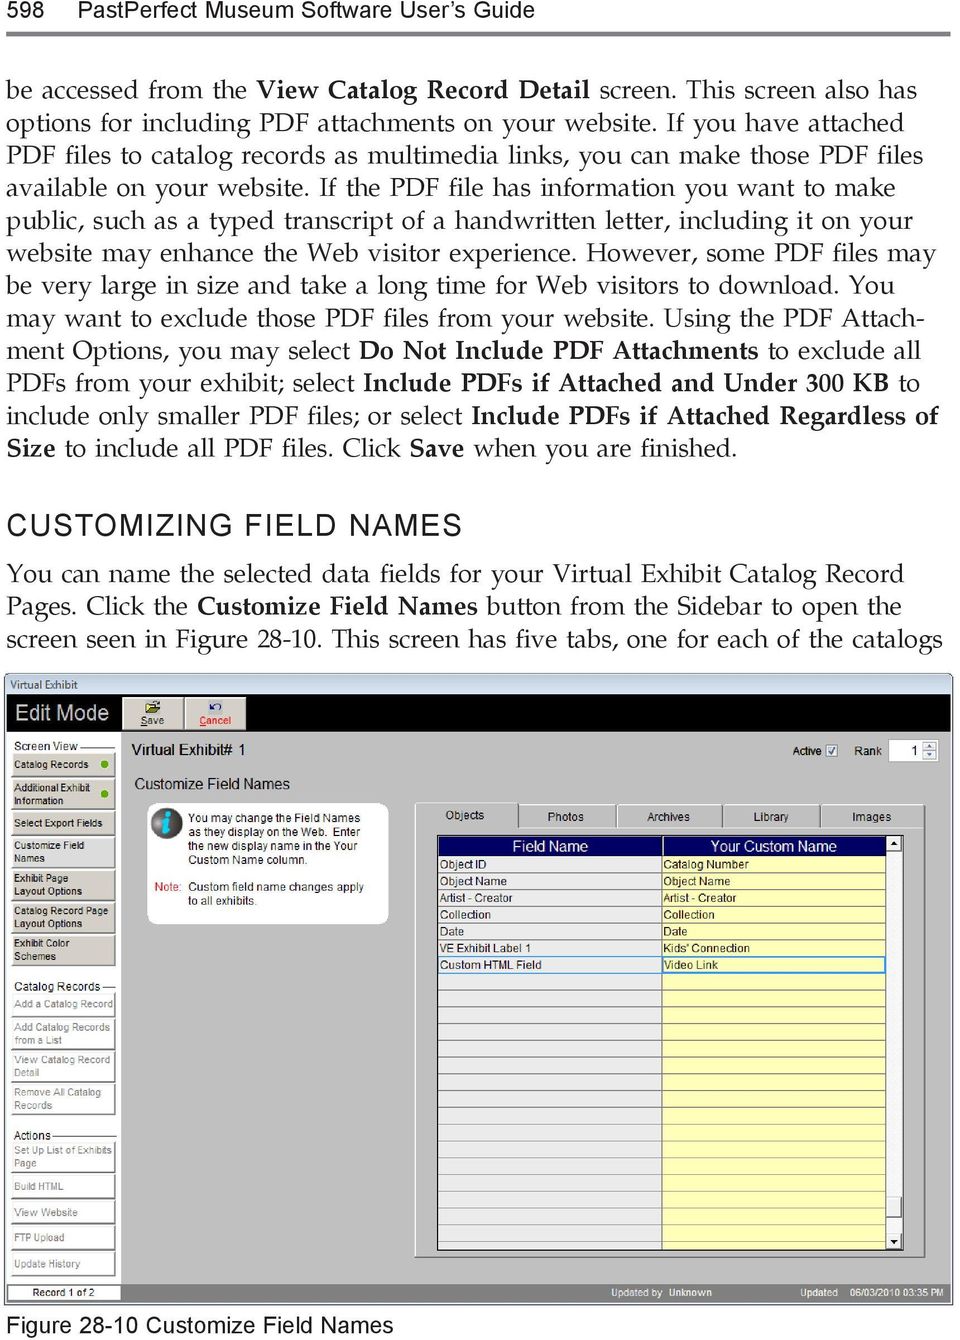 If the PDF file has information you want to make public, such as a typed transcript of a handwritten letter, including it on your website may enhance the Web visitor experience.